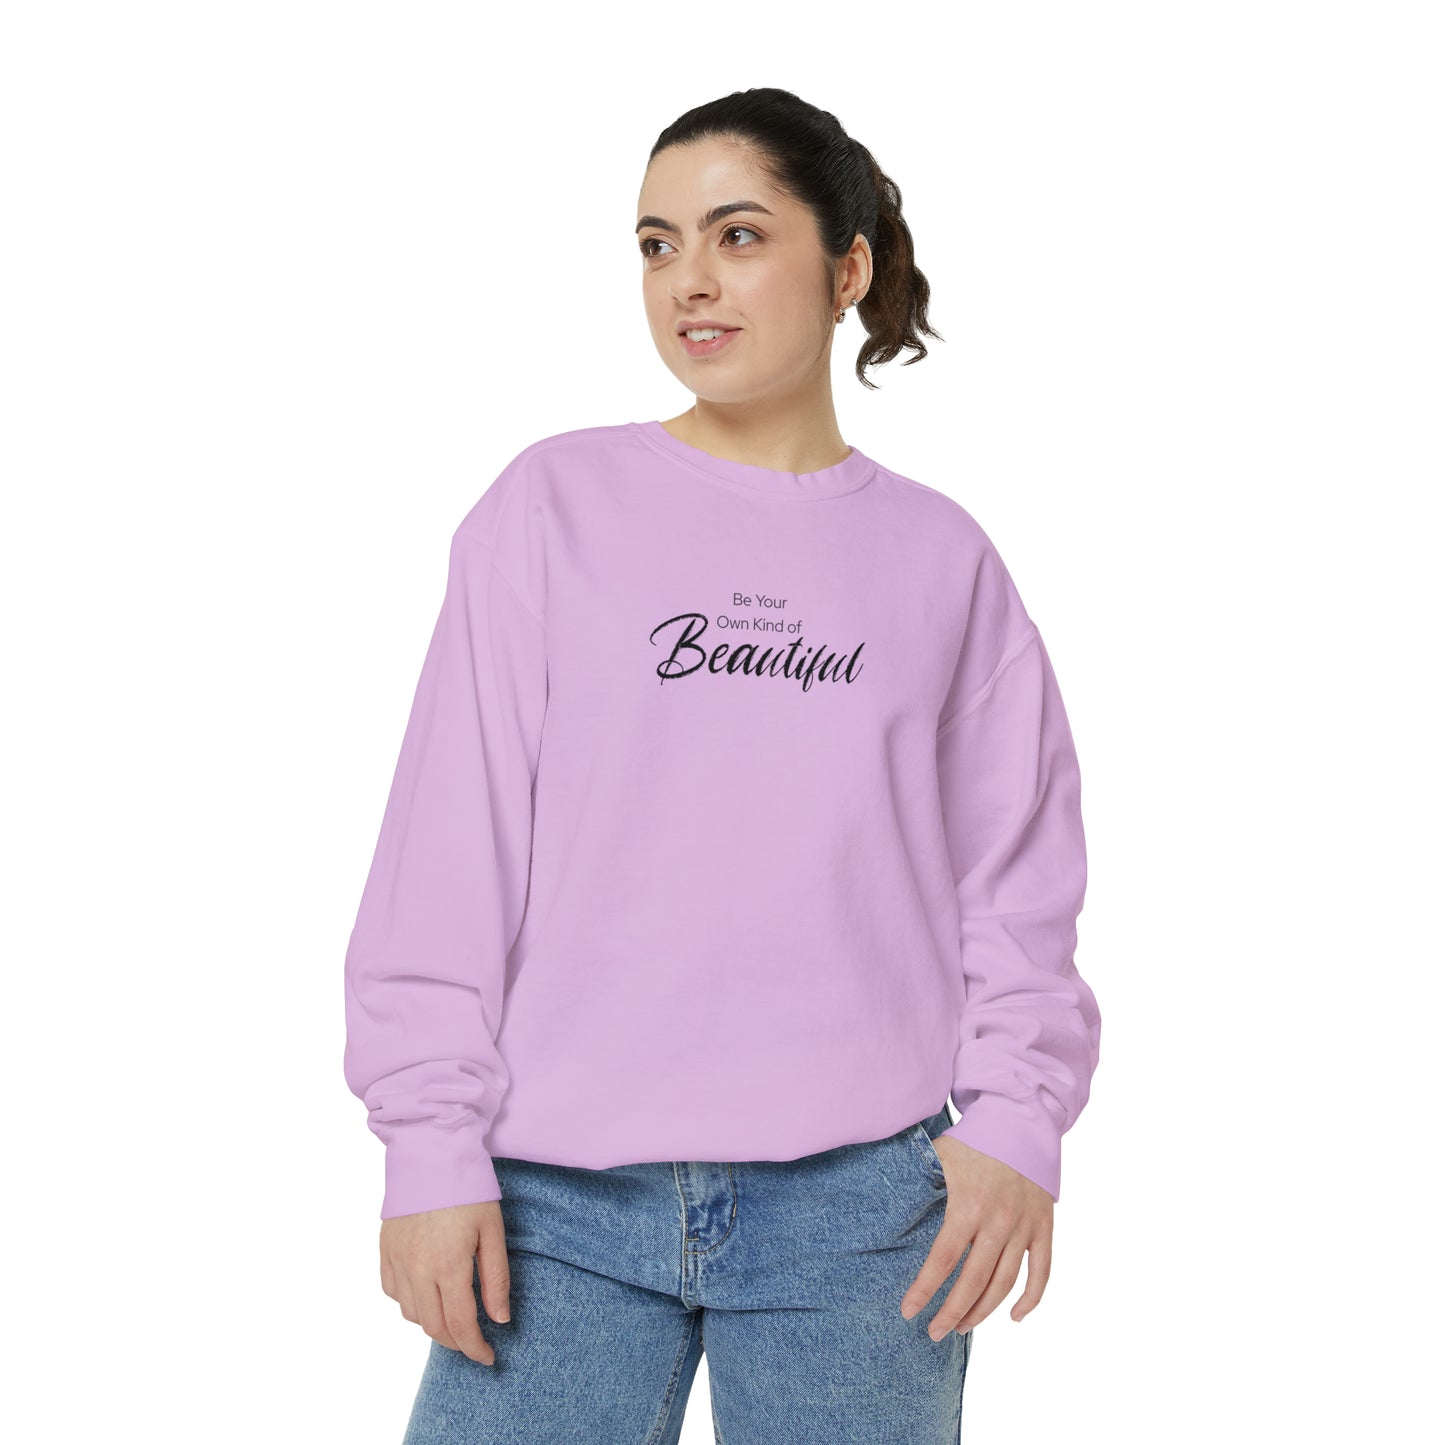 Be Your Own Kind of Beautiful Unisex Garment-Dyed Sweatshirt